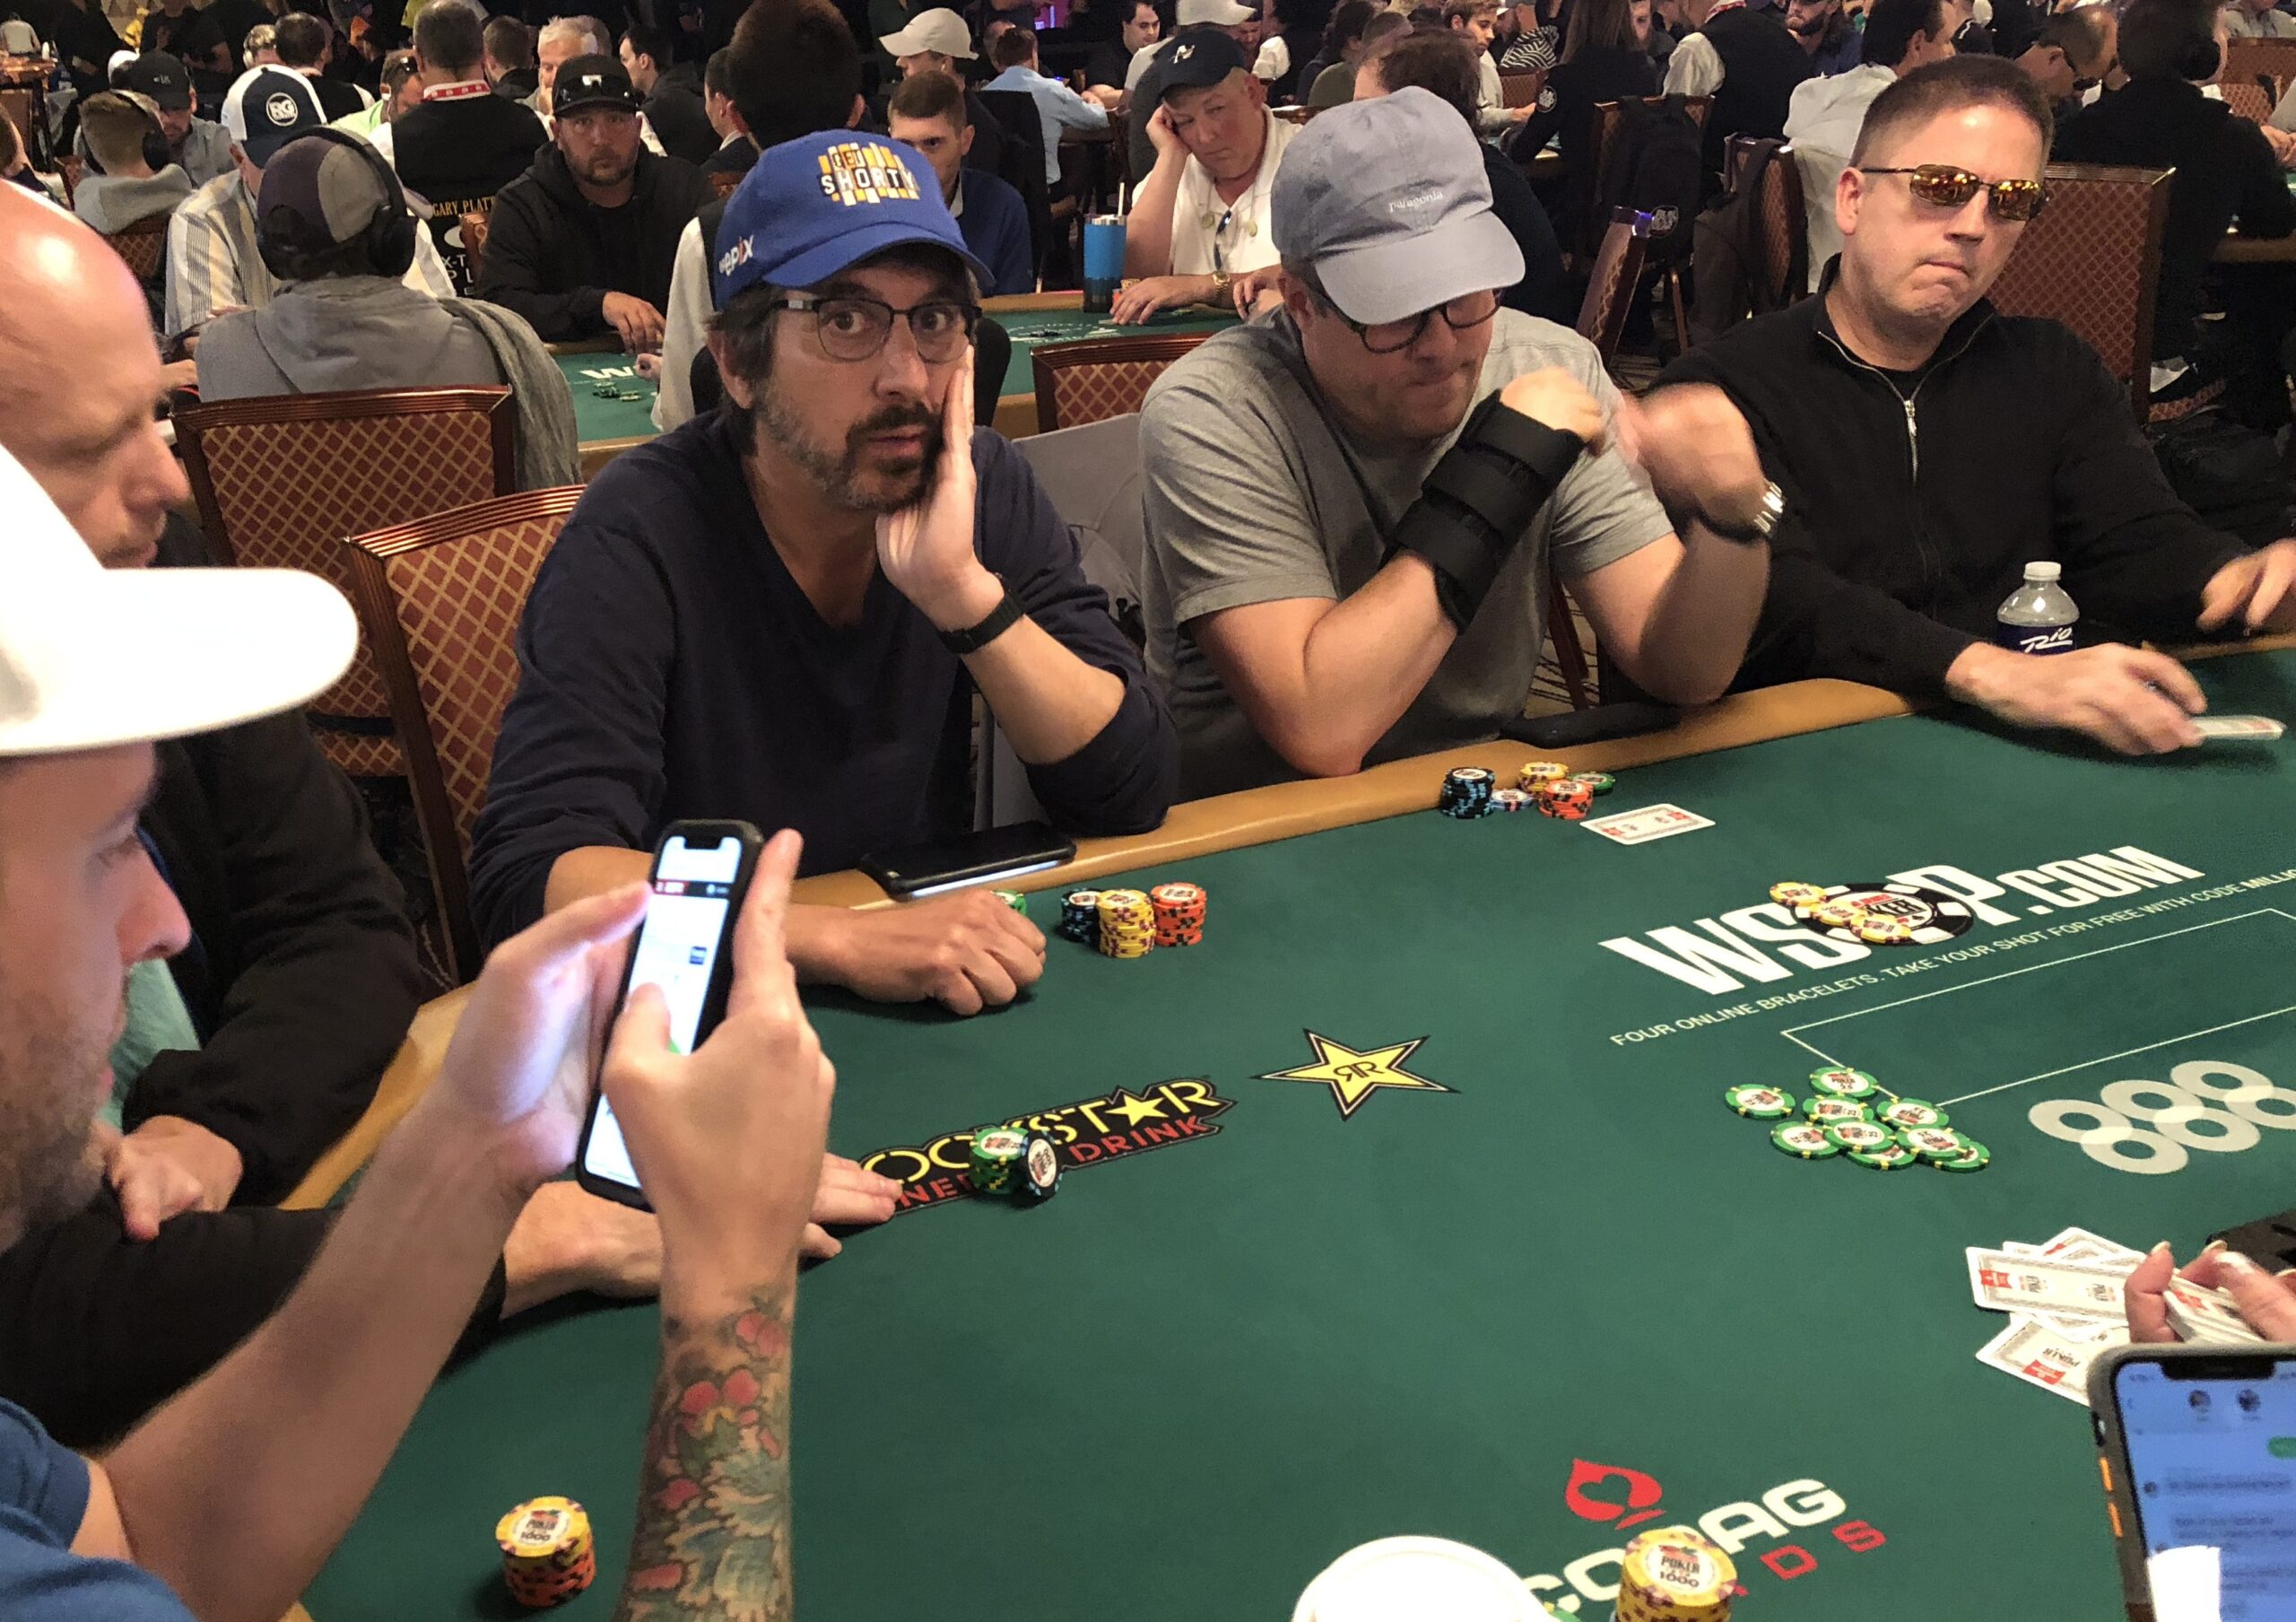 Ray Romano Bags Chips, Grinder Goes Wild, Galfonds Tumble, Former Champs Remain: Welcome to Day2AB of WSOP Main Event